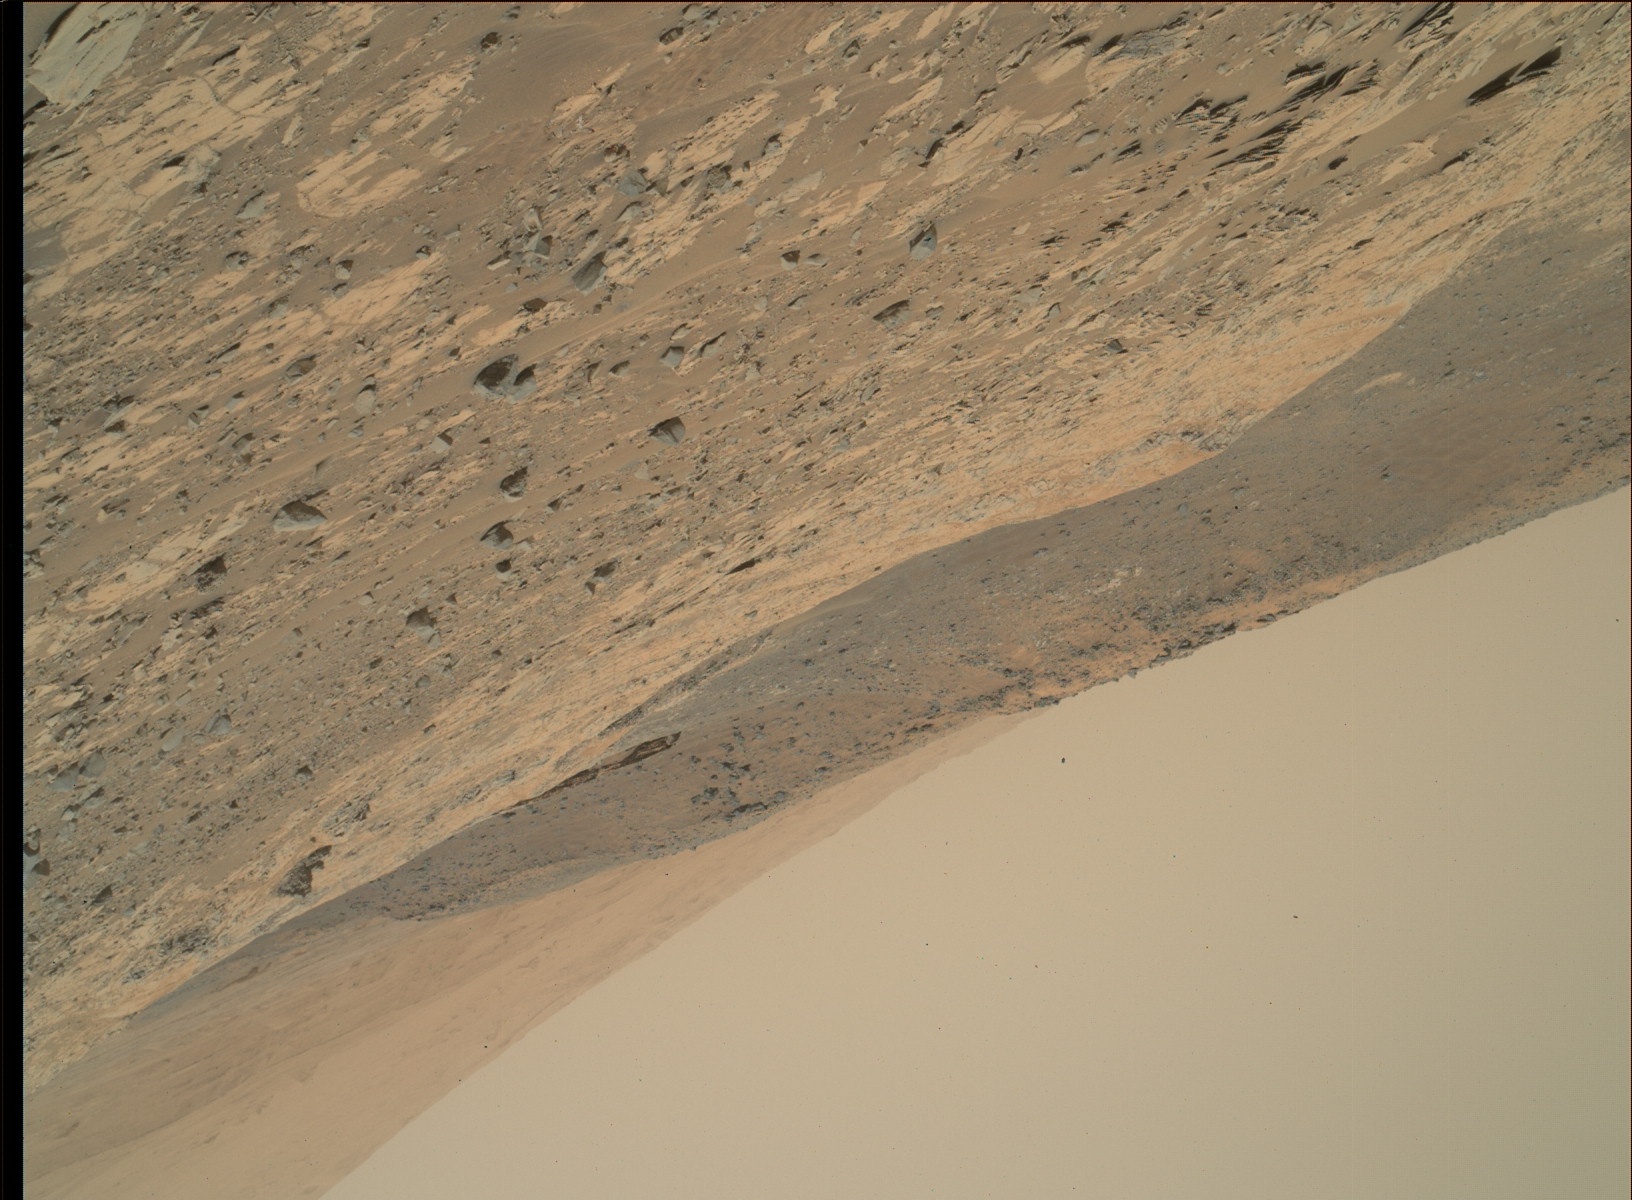 Nasa's Mars rover Curiosity acquired this image using its Mars Hand Lens Imager (MAHLI) on Sol 901, at drive 366, site number 45